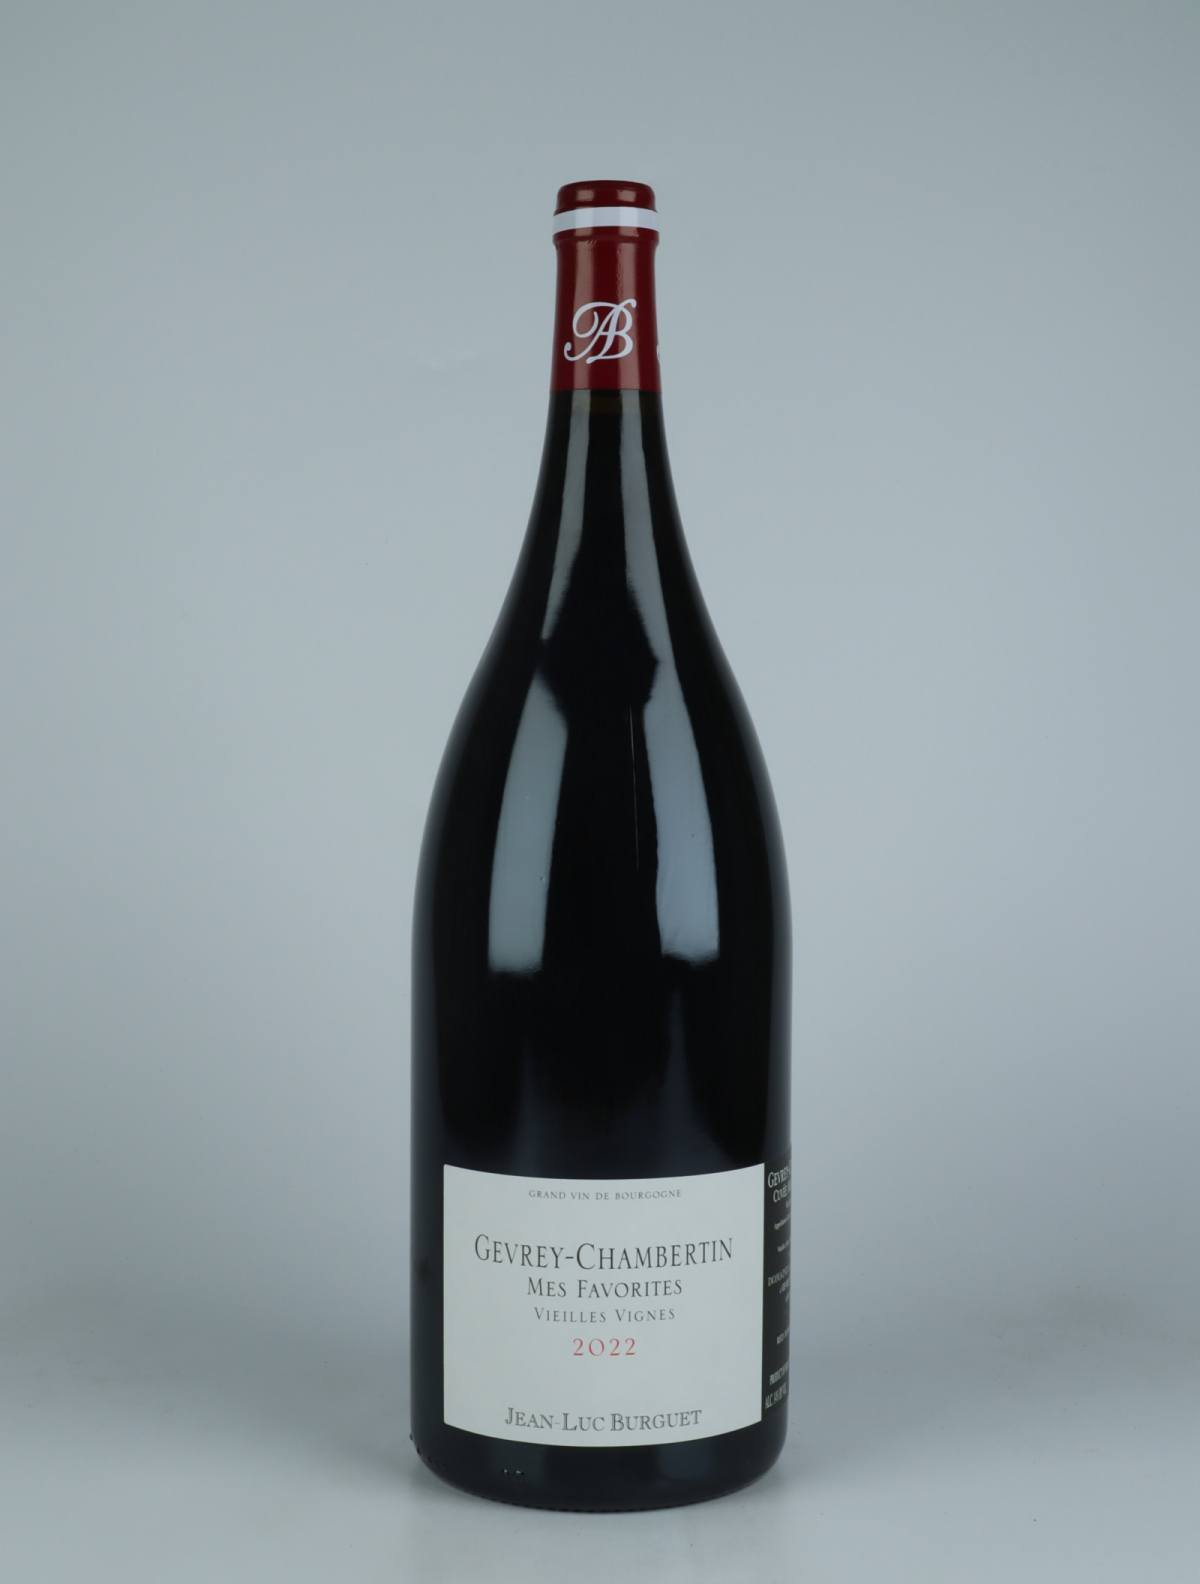 A bottle 2022 Gevrey-Chambertin - Mes Favorites - Magnum Red wine from Jean-Luc & Eric Burguet, Burgundy in France